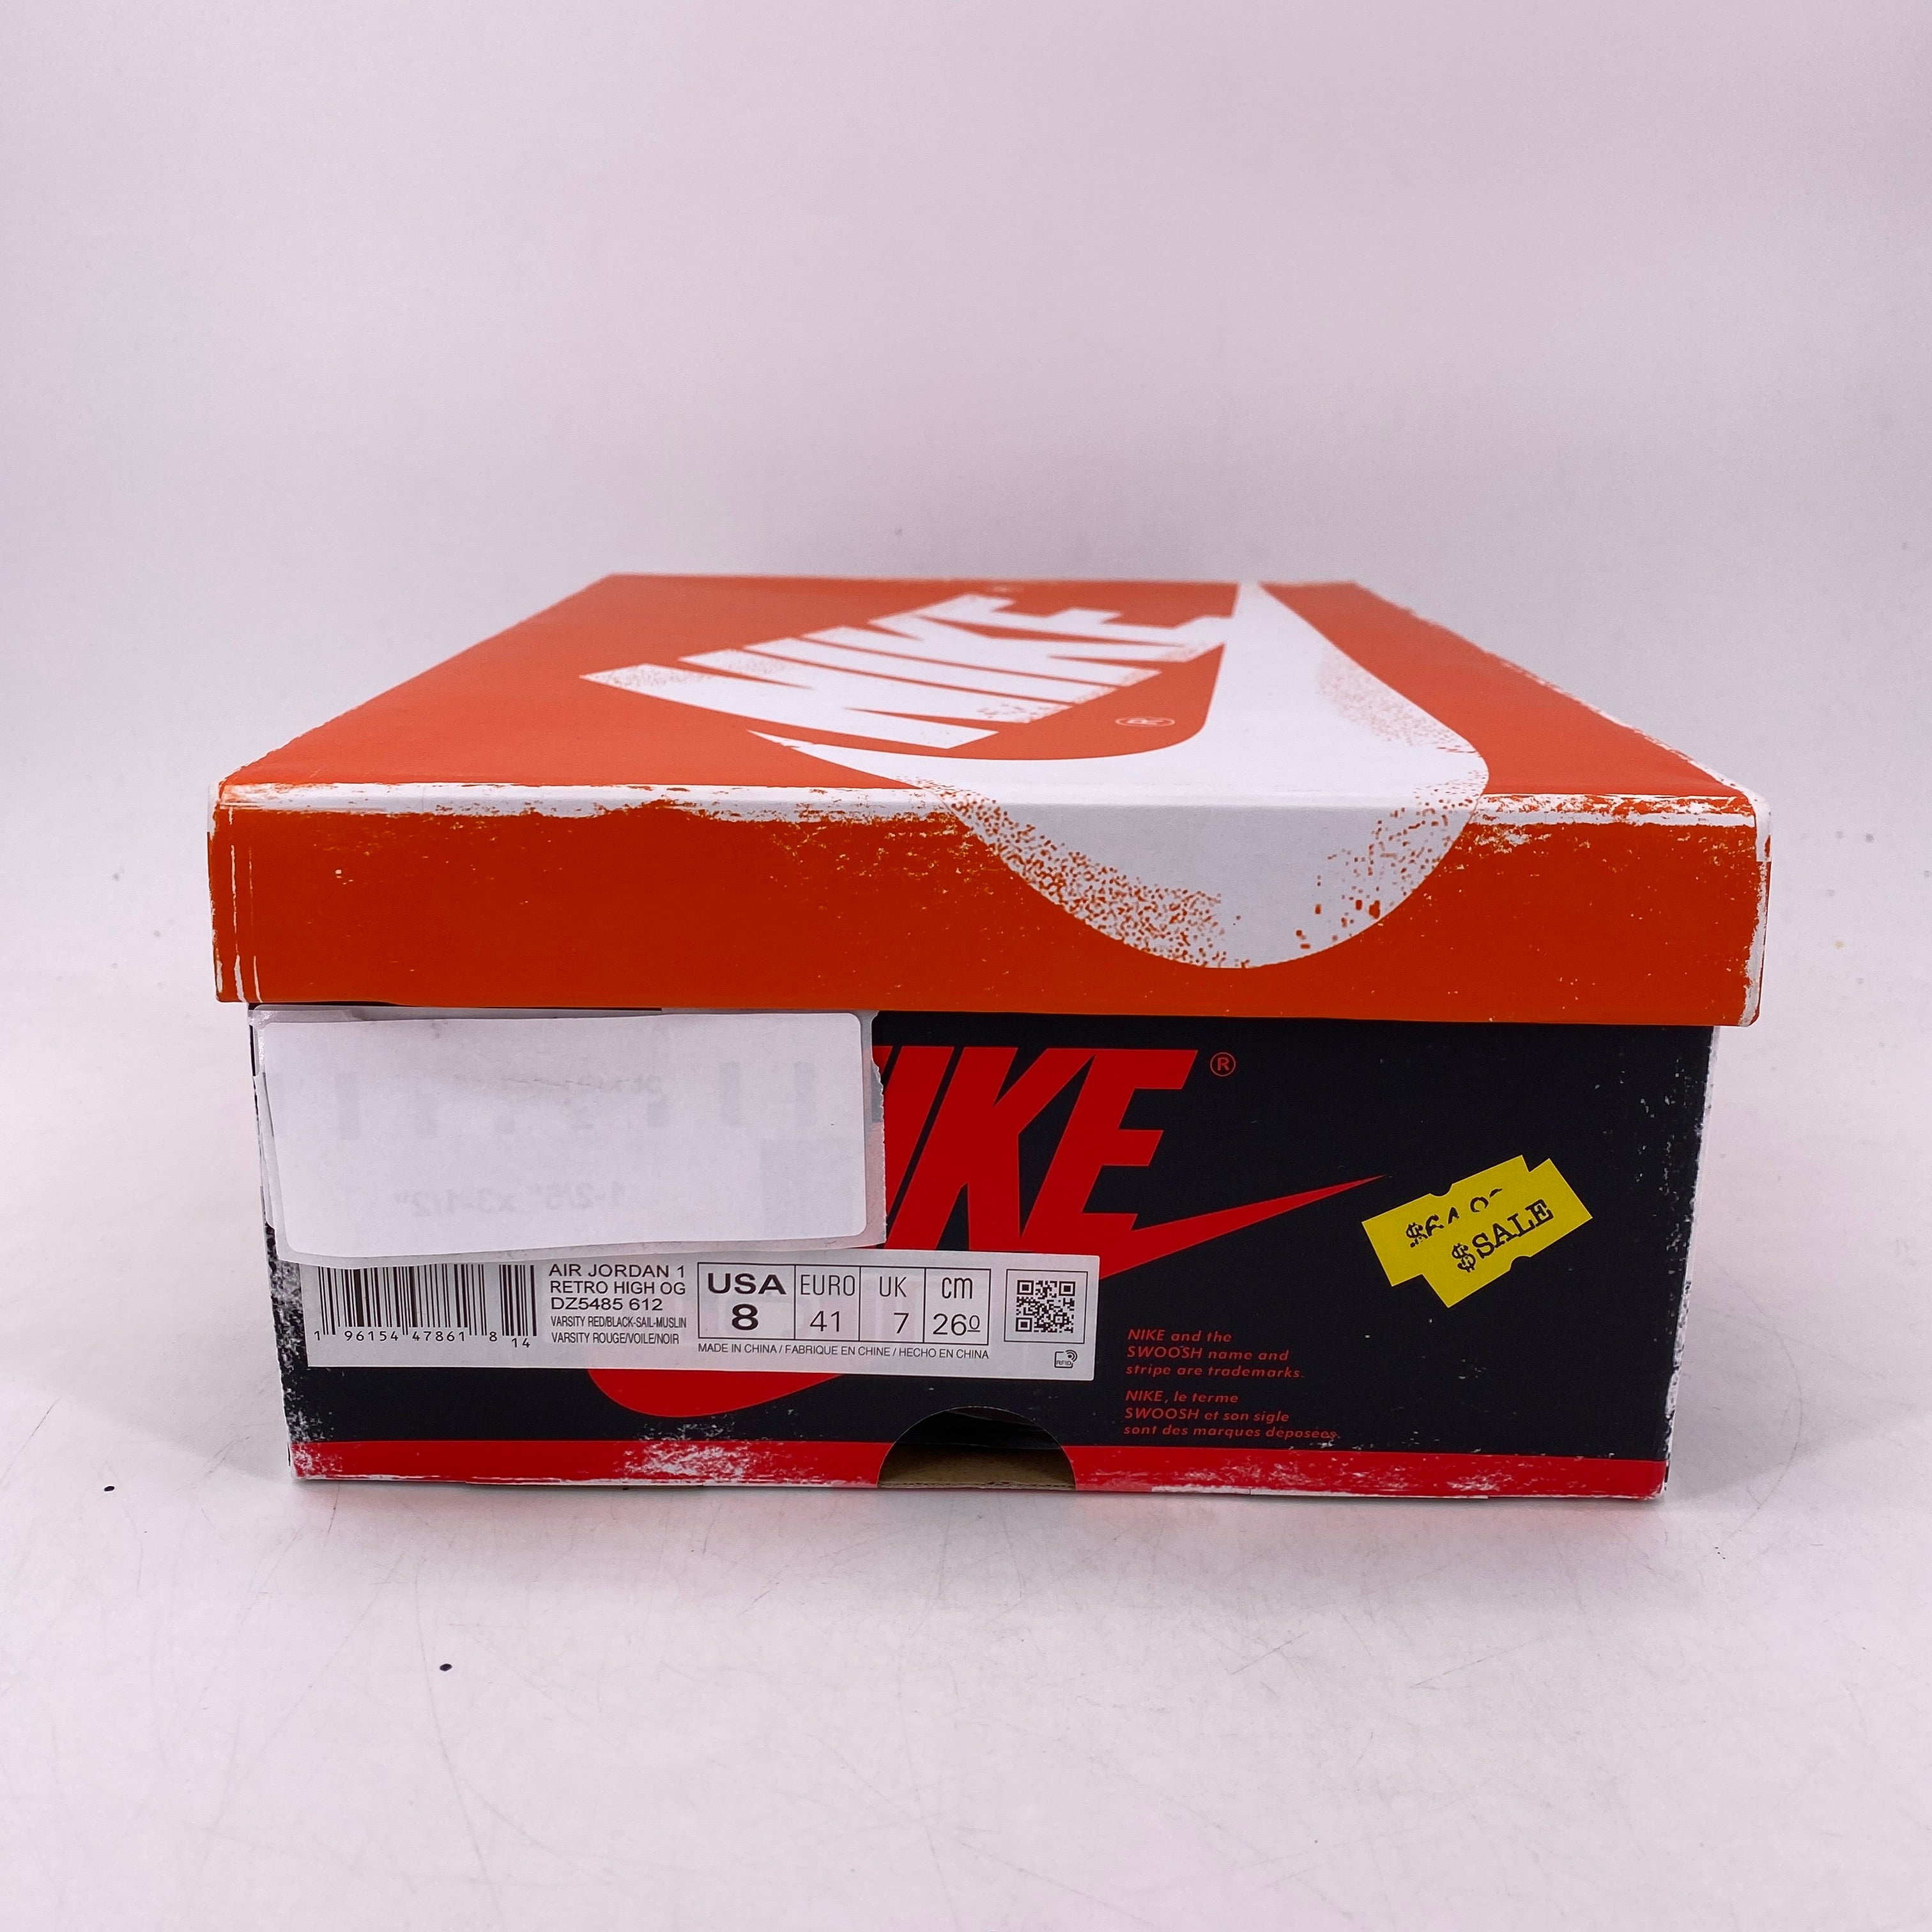 Air Jordan 1 Retro High OG &quot;Lost And Found&quot; 2022 New Size 8